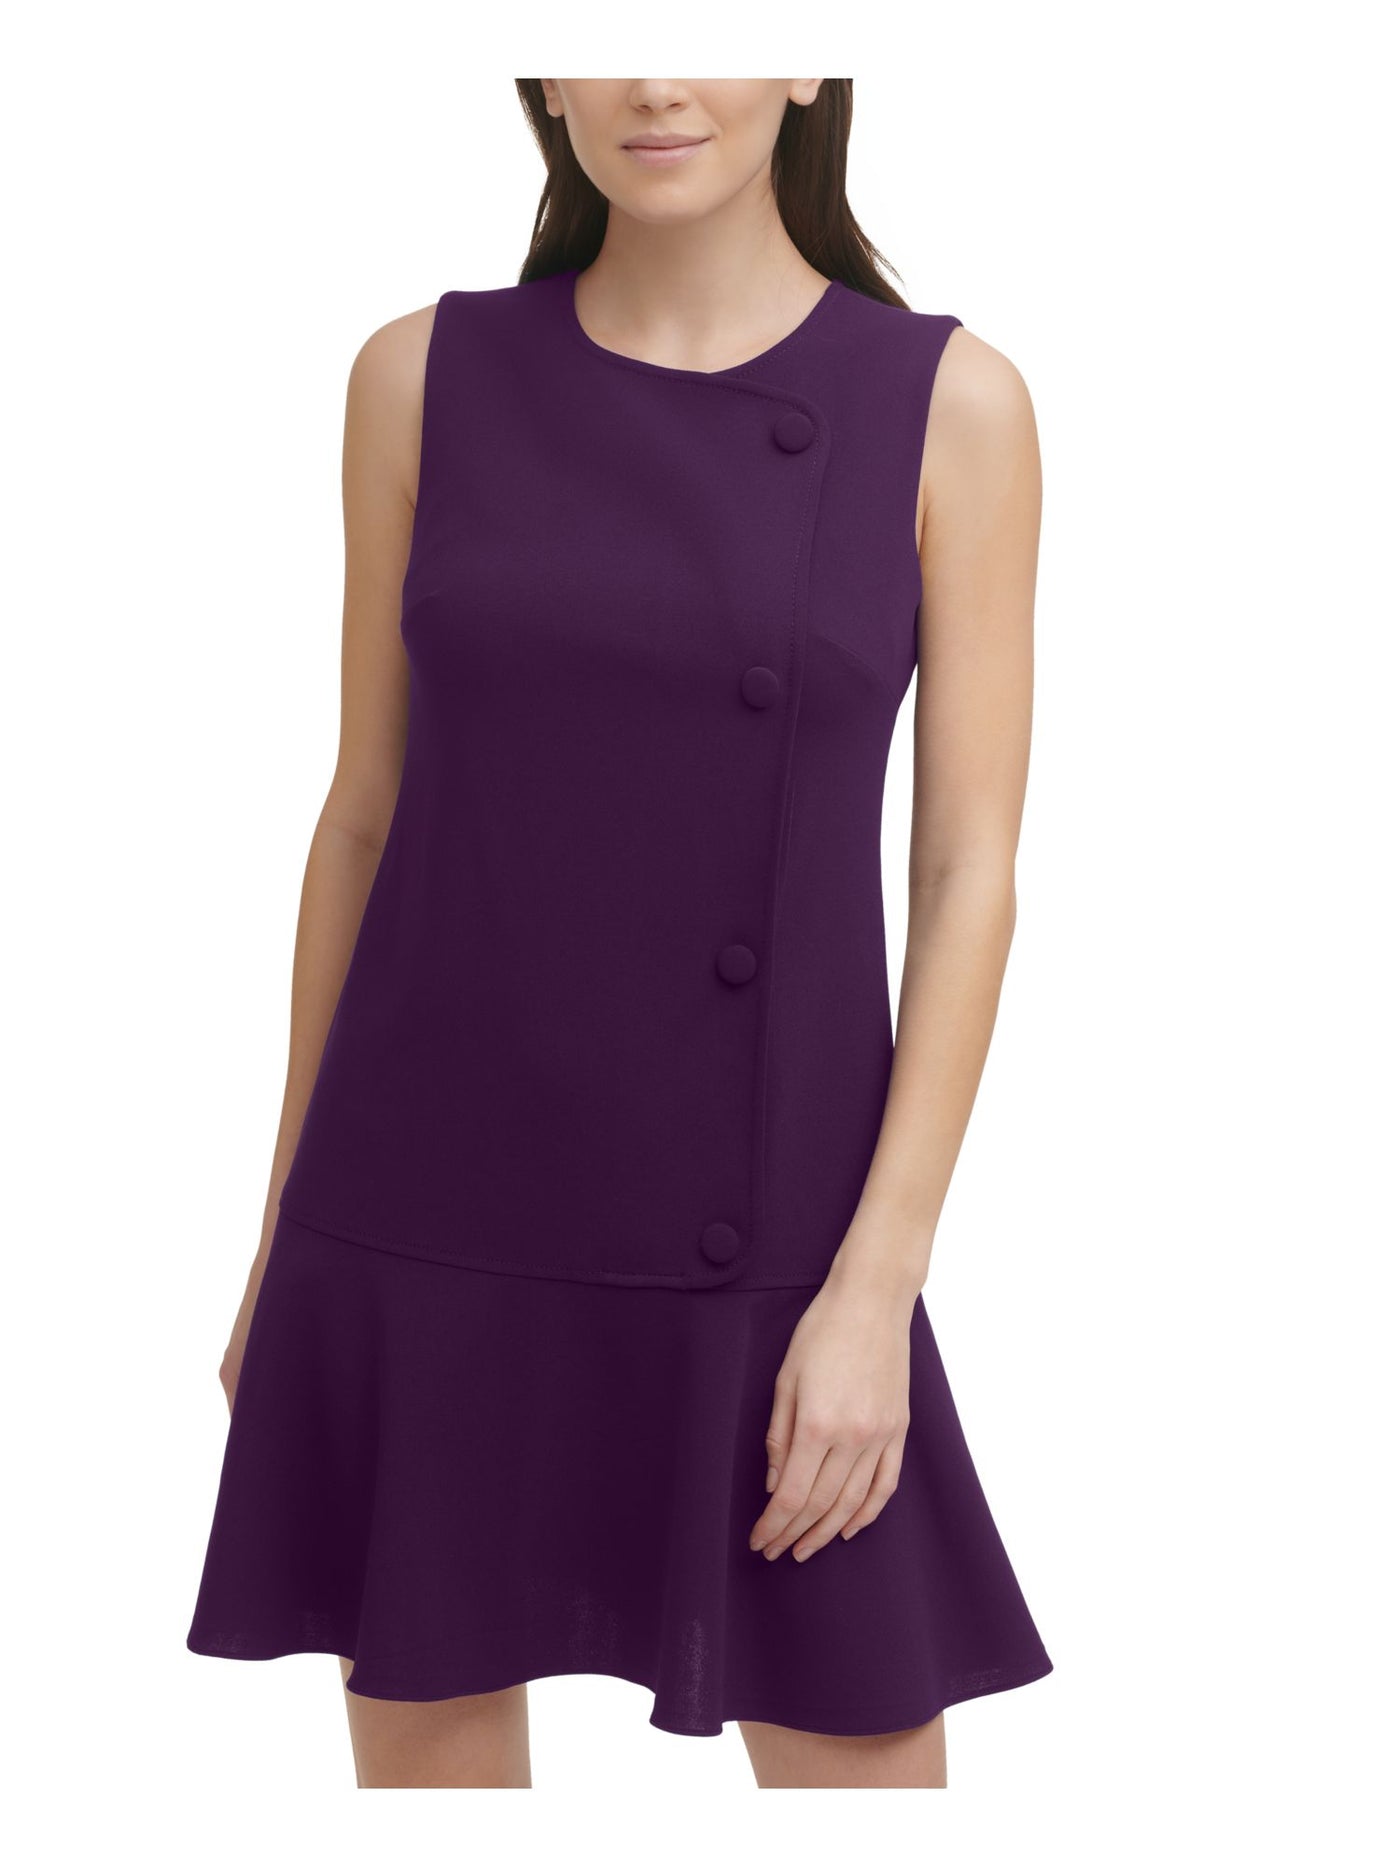 DKNY Womens Purple Stretch Zippered Fitted Faux Button Darted Sleeveless Round Neck Short Wear To Work Drop Waist Dress 8